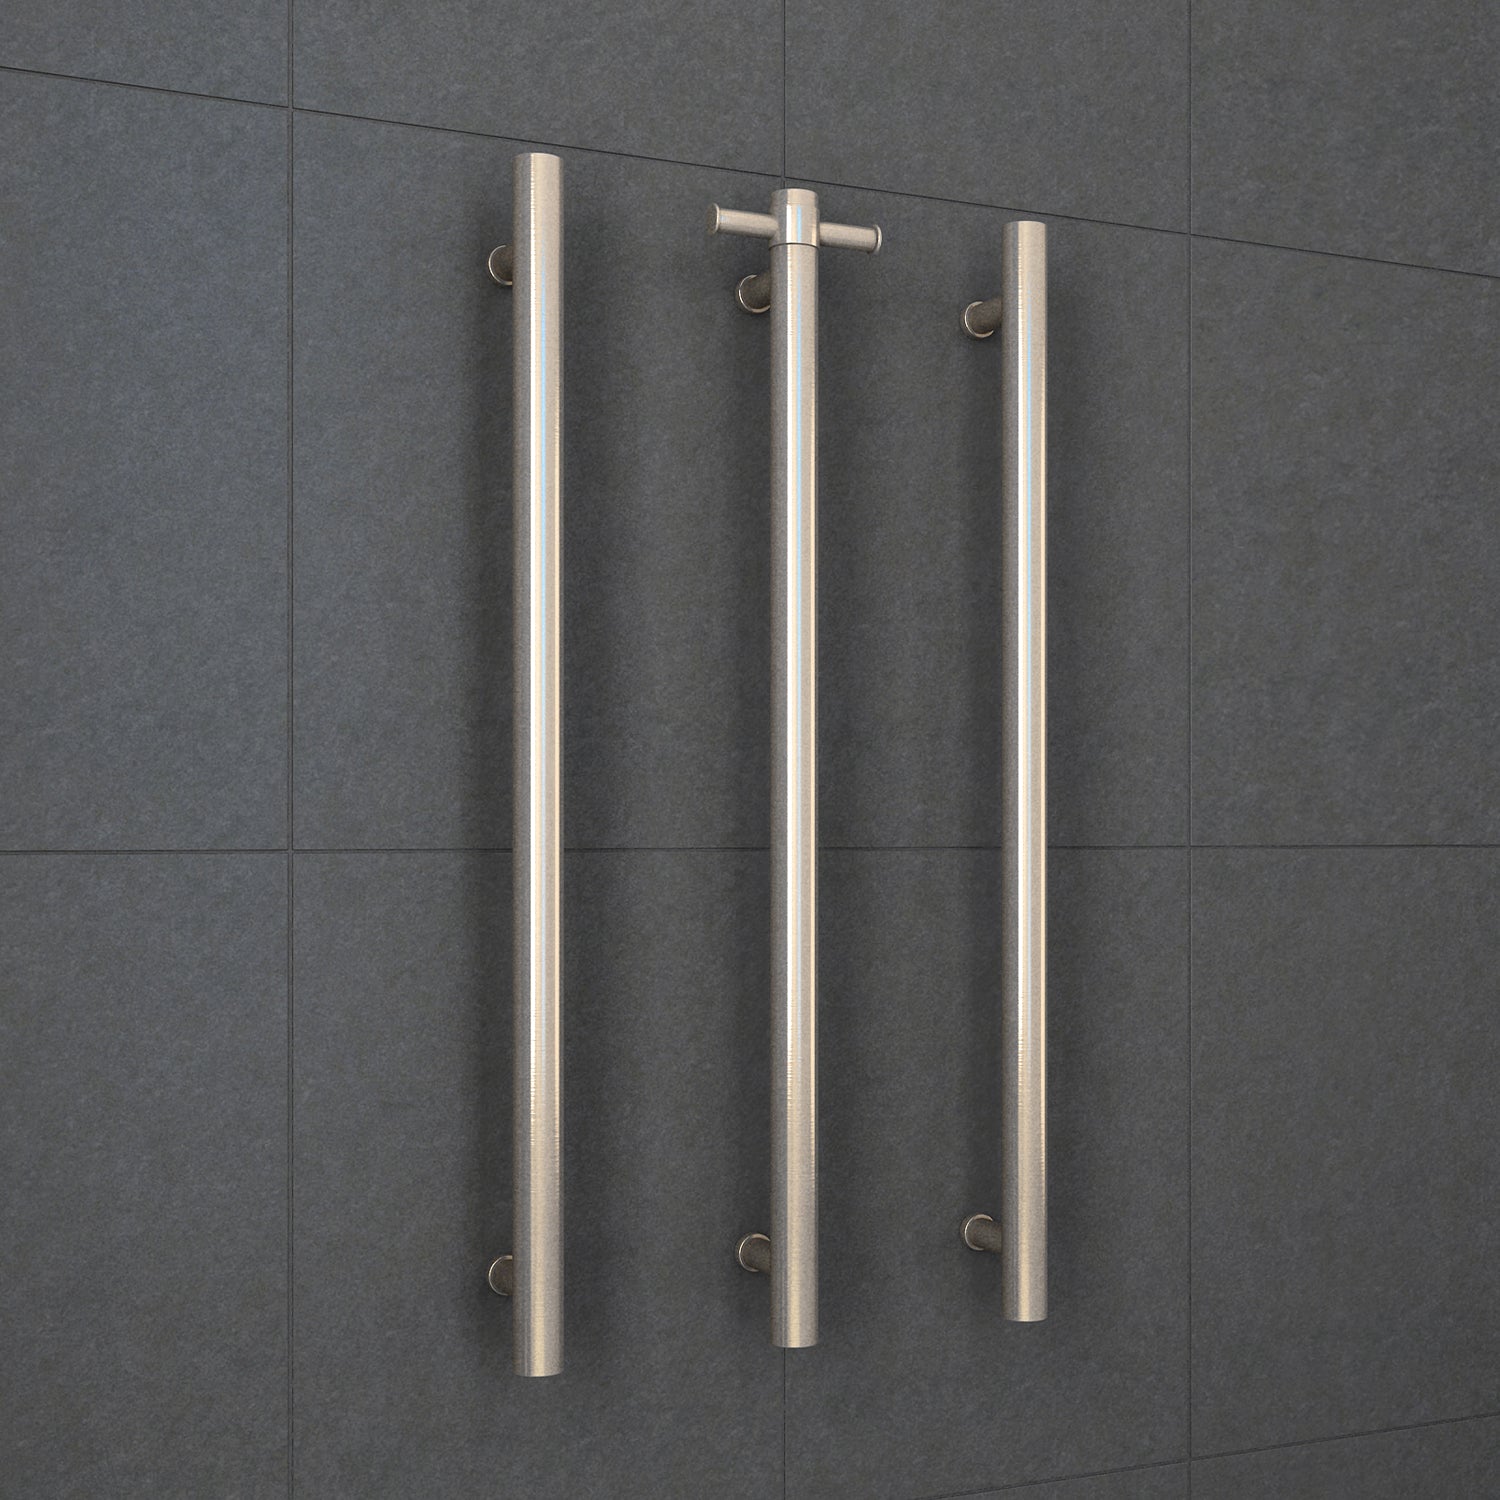 Thermogroup Round Vertical Single Heated Towel Rail Brushed Nickel VS900HBN